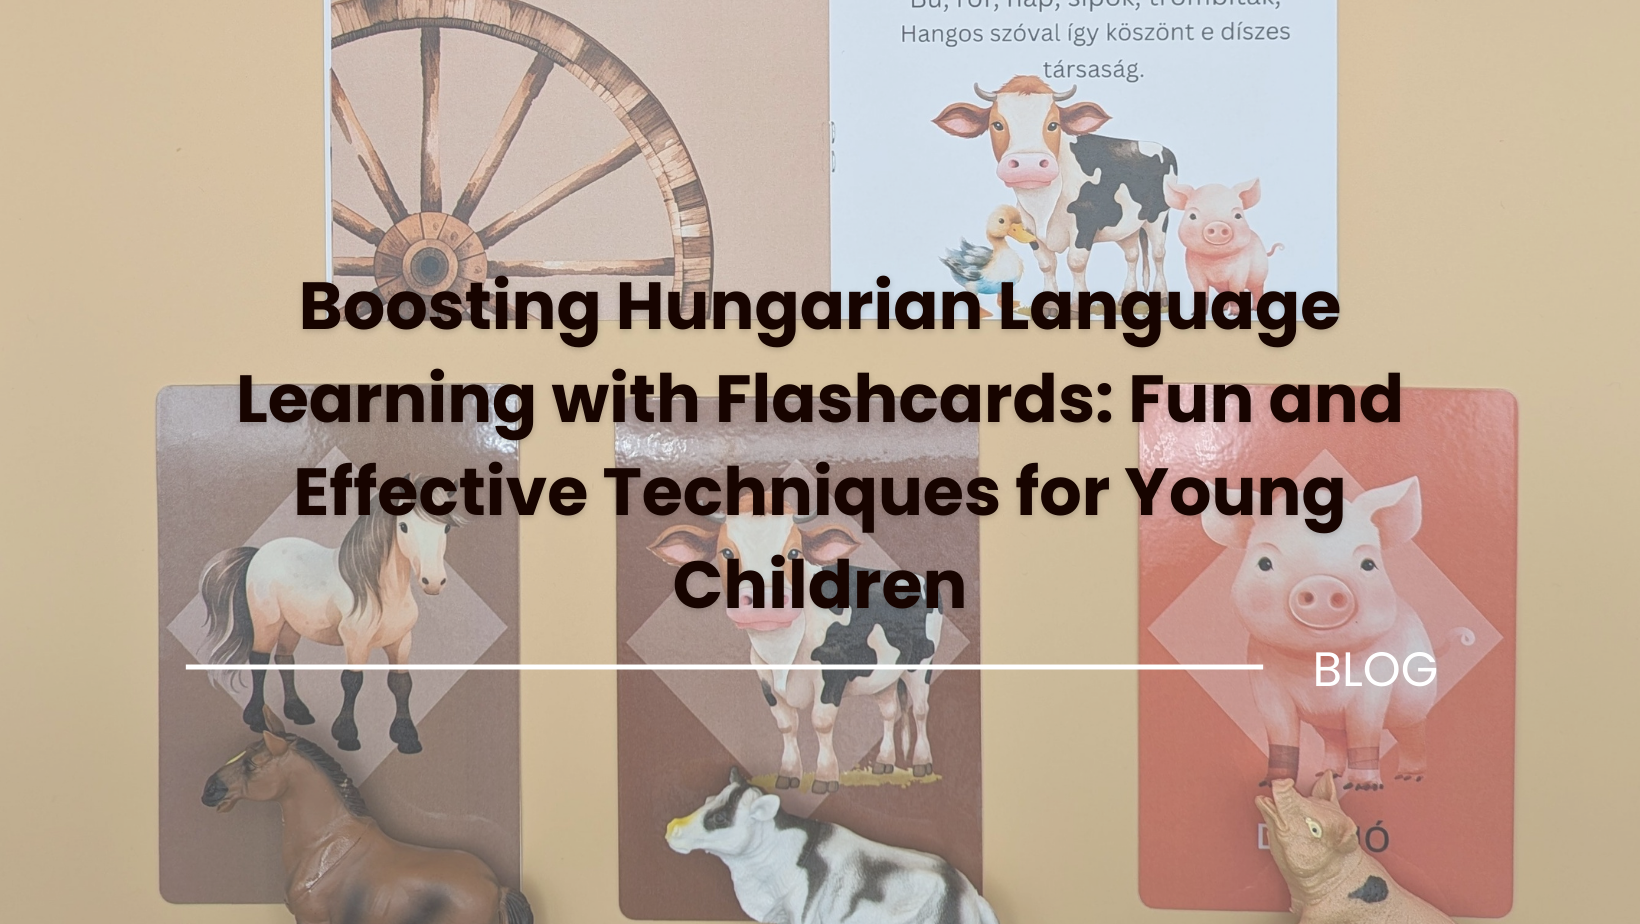 Boosting Hungarian Language Learning with Flashcards: Fun and Effective Techniques for Young Children